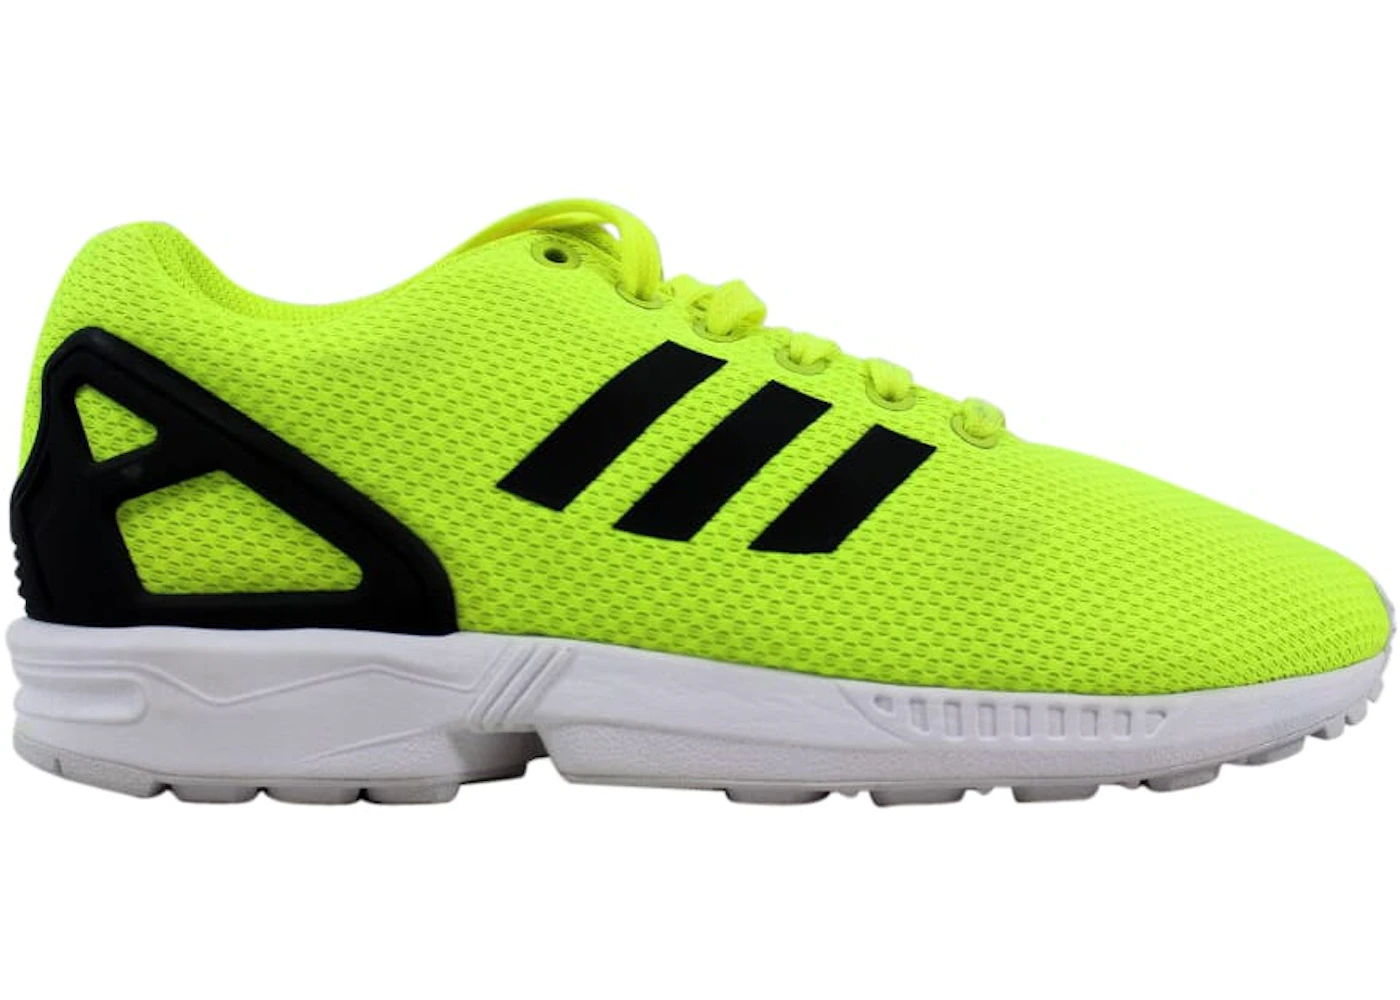 adidas ZX Electric Yellow Men's - M22508 -